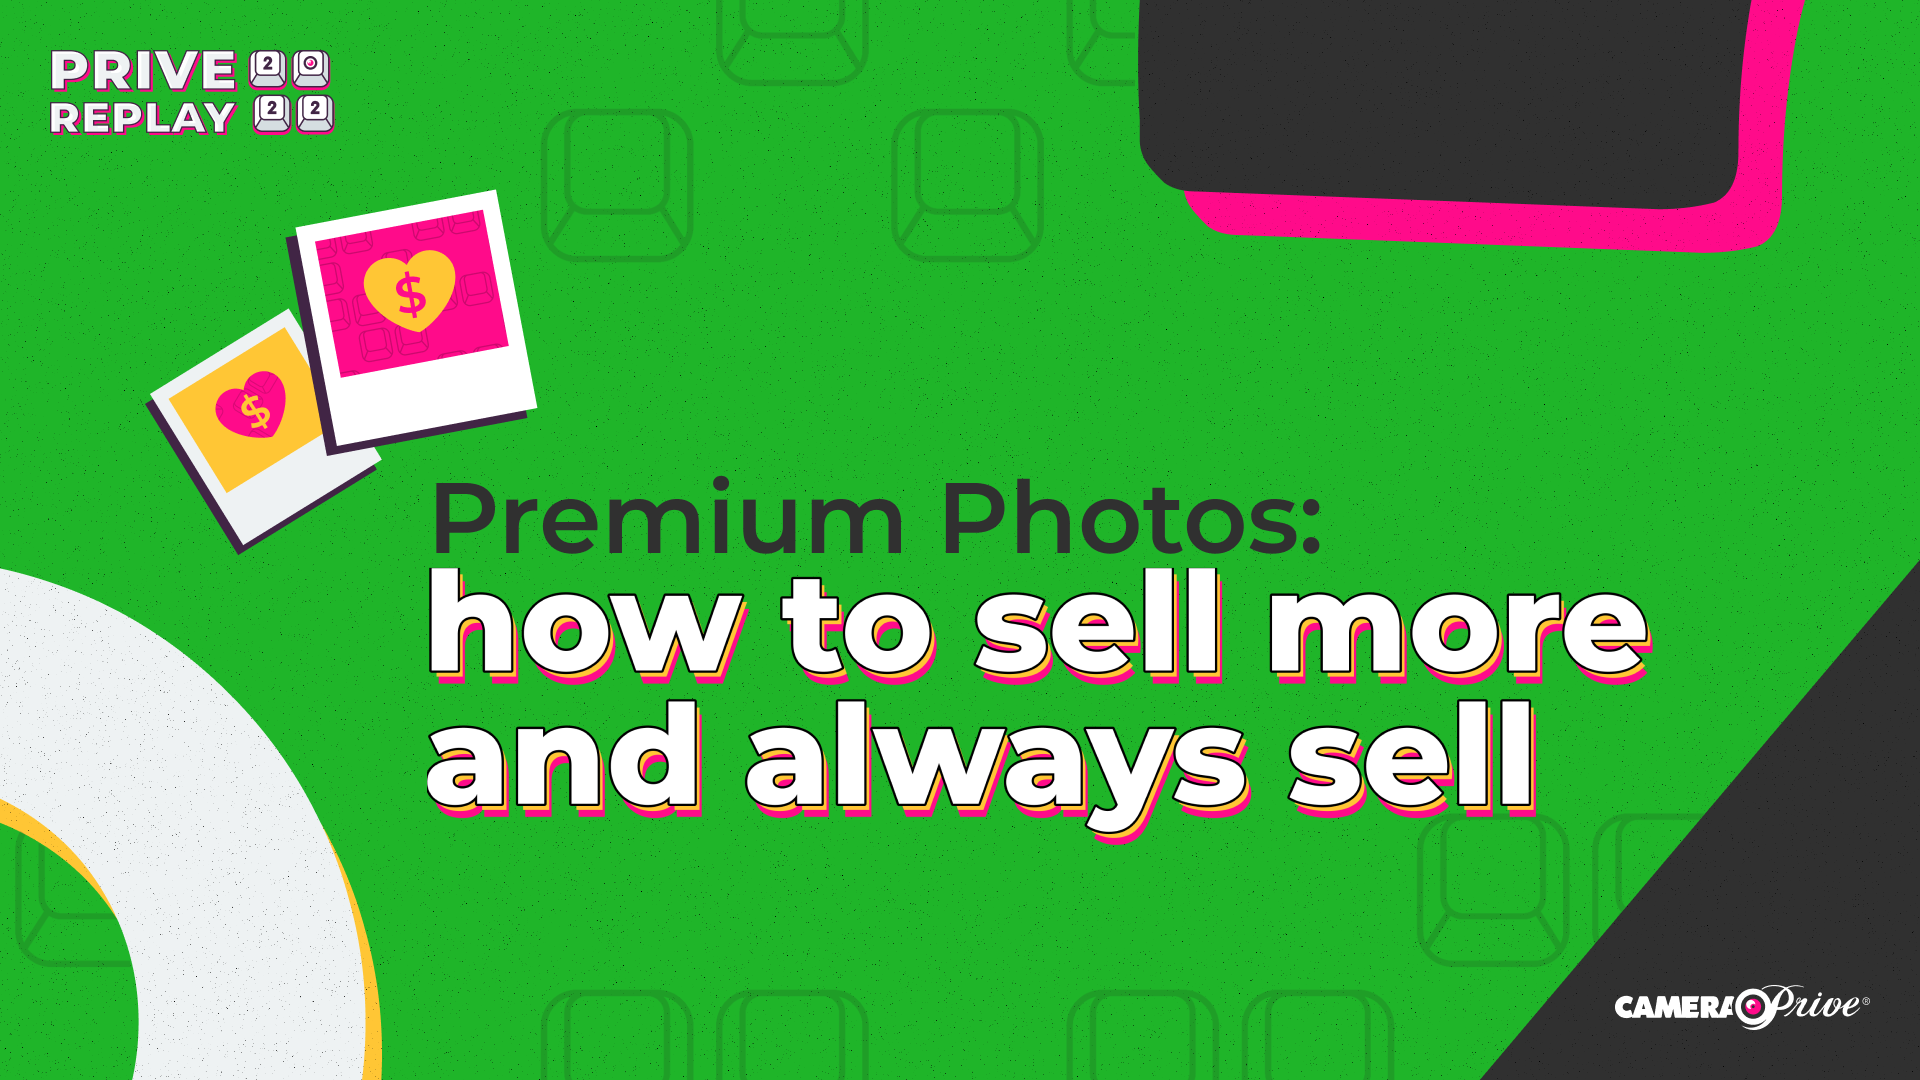 Premium Photos: How to Sell More and Always Sell